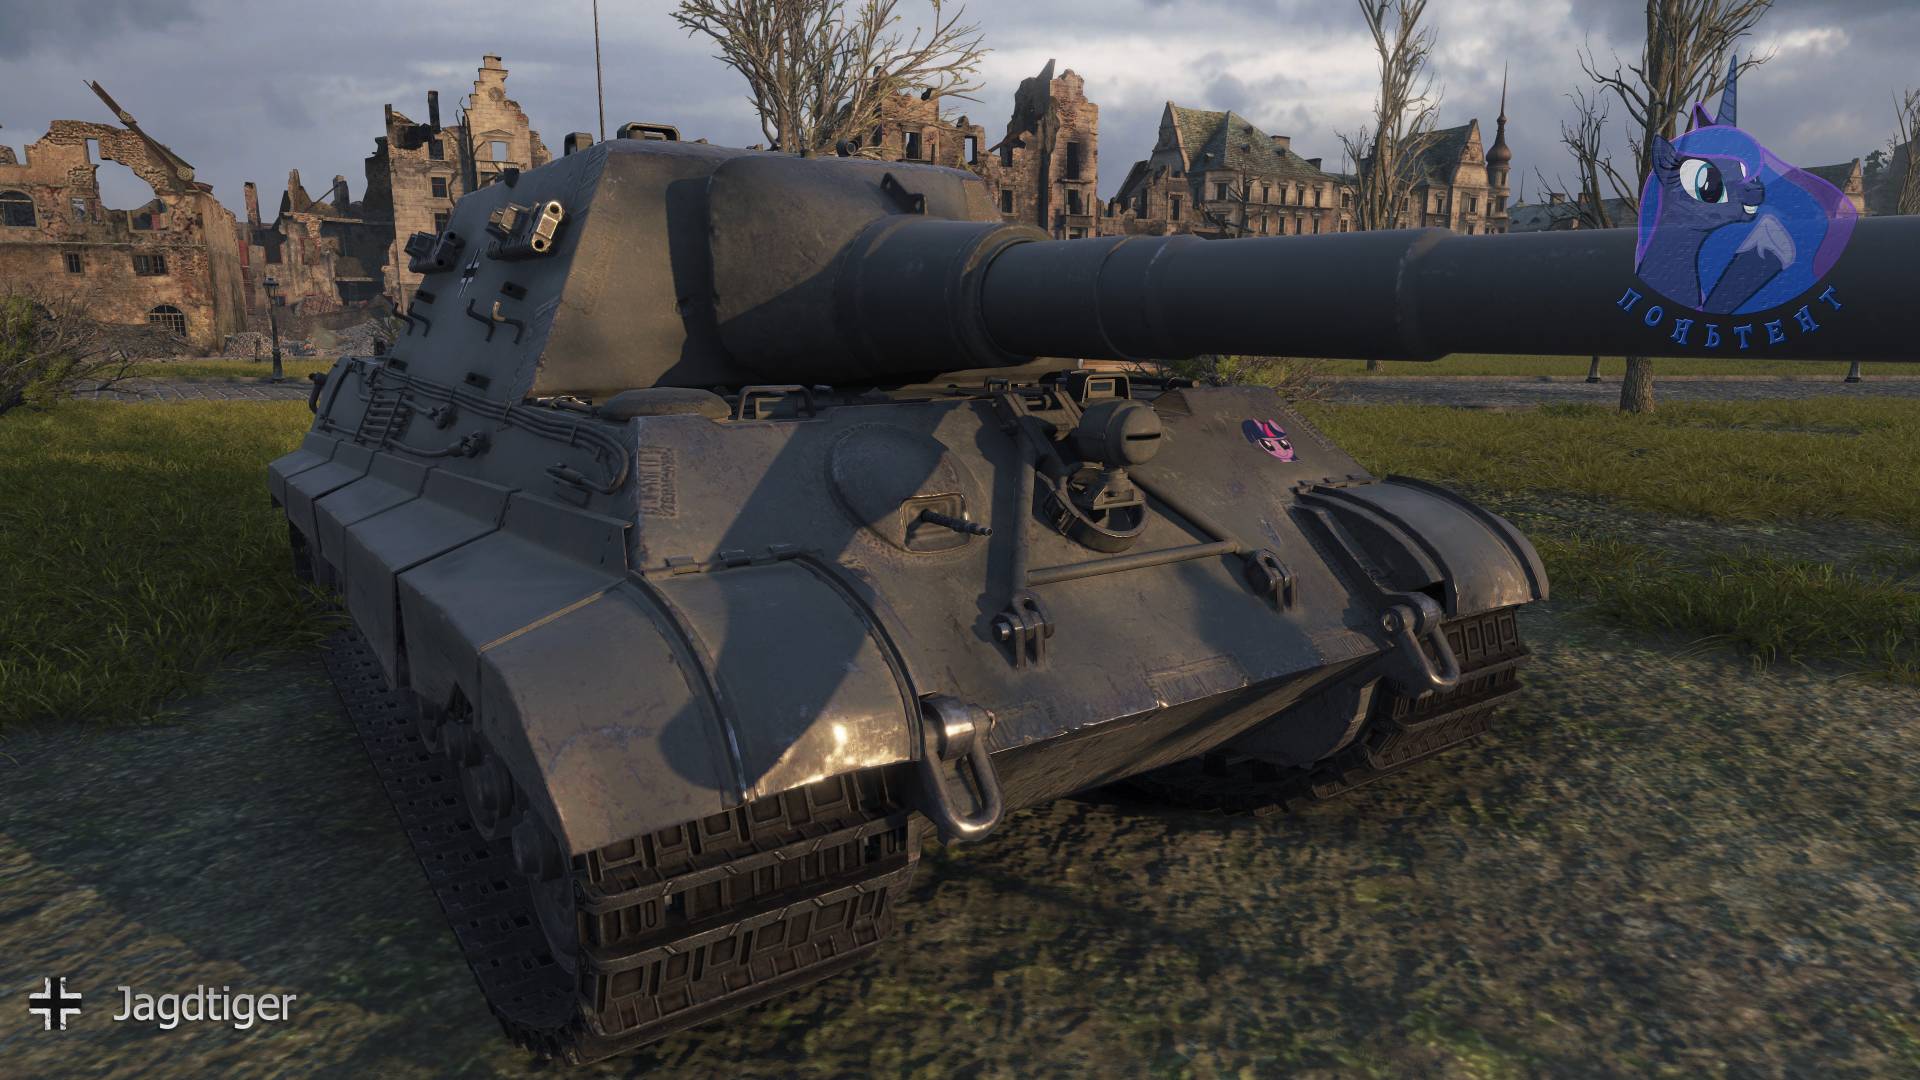 World of Tanks leaks Black Prince hd model pictures 